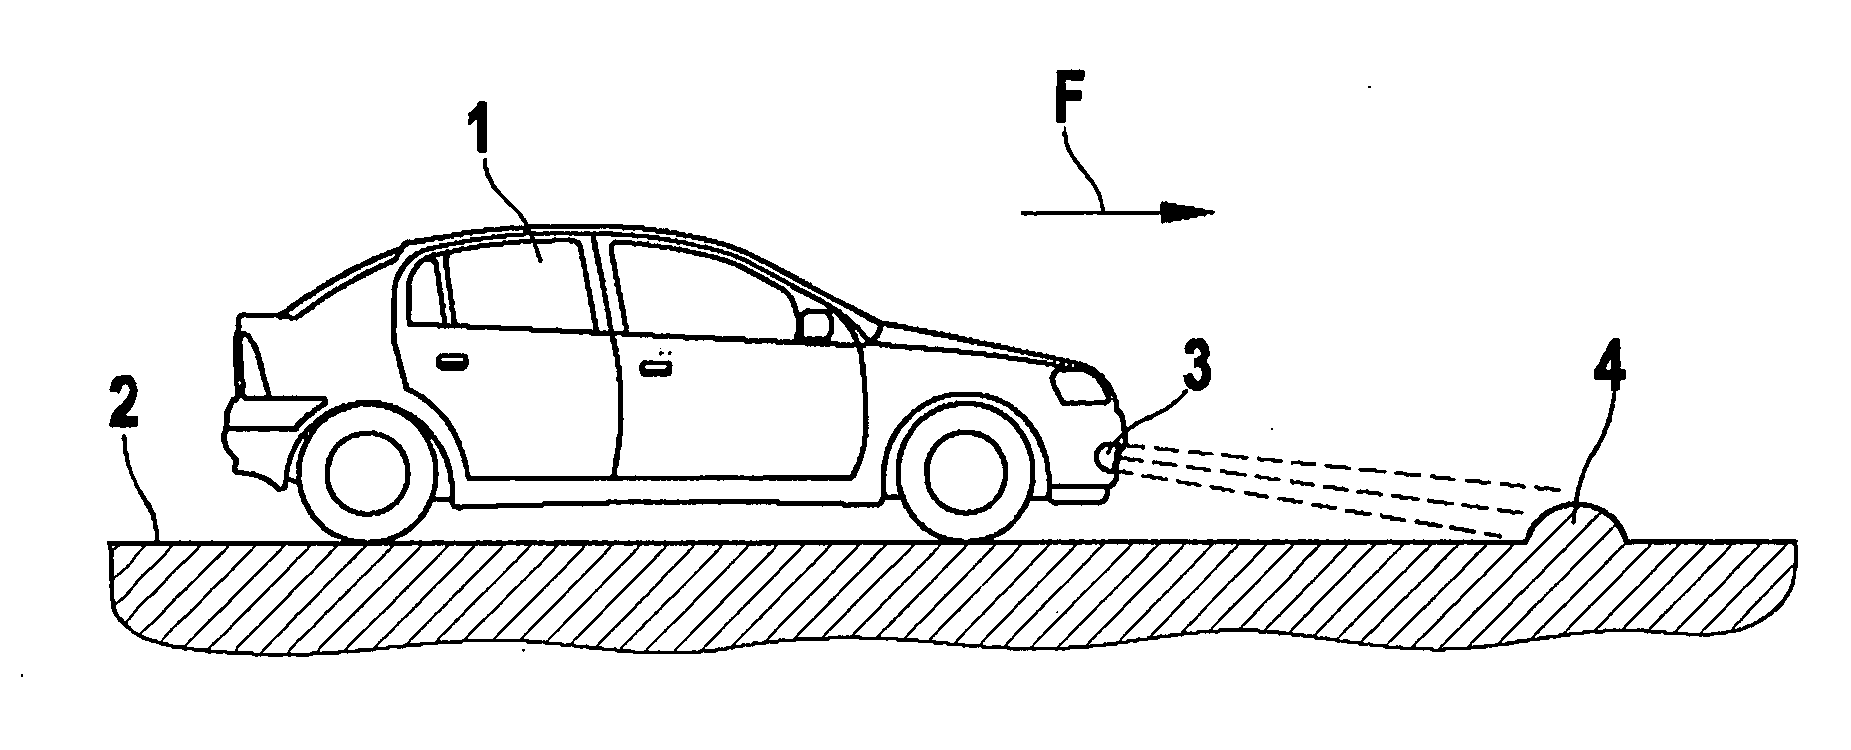 Method and system for assisting the driver of a motor vehicle in identifying road bumps